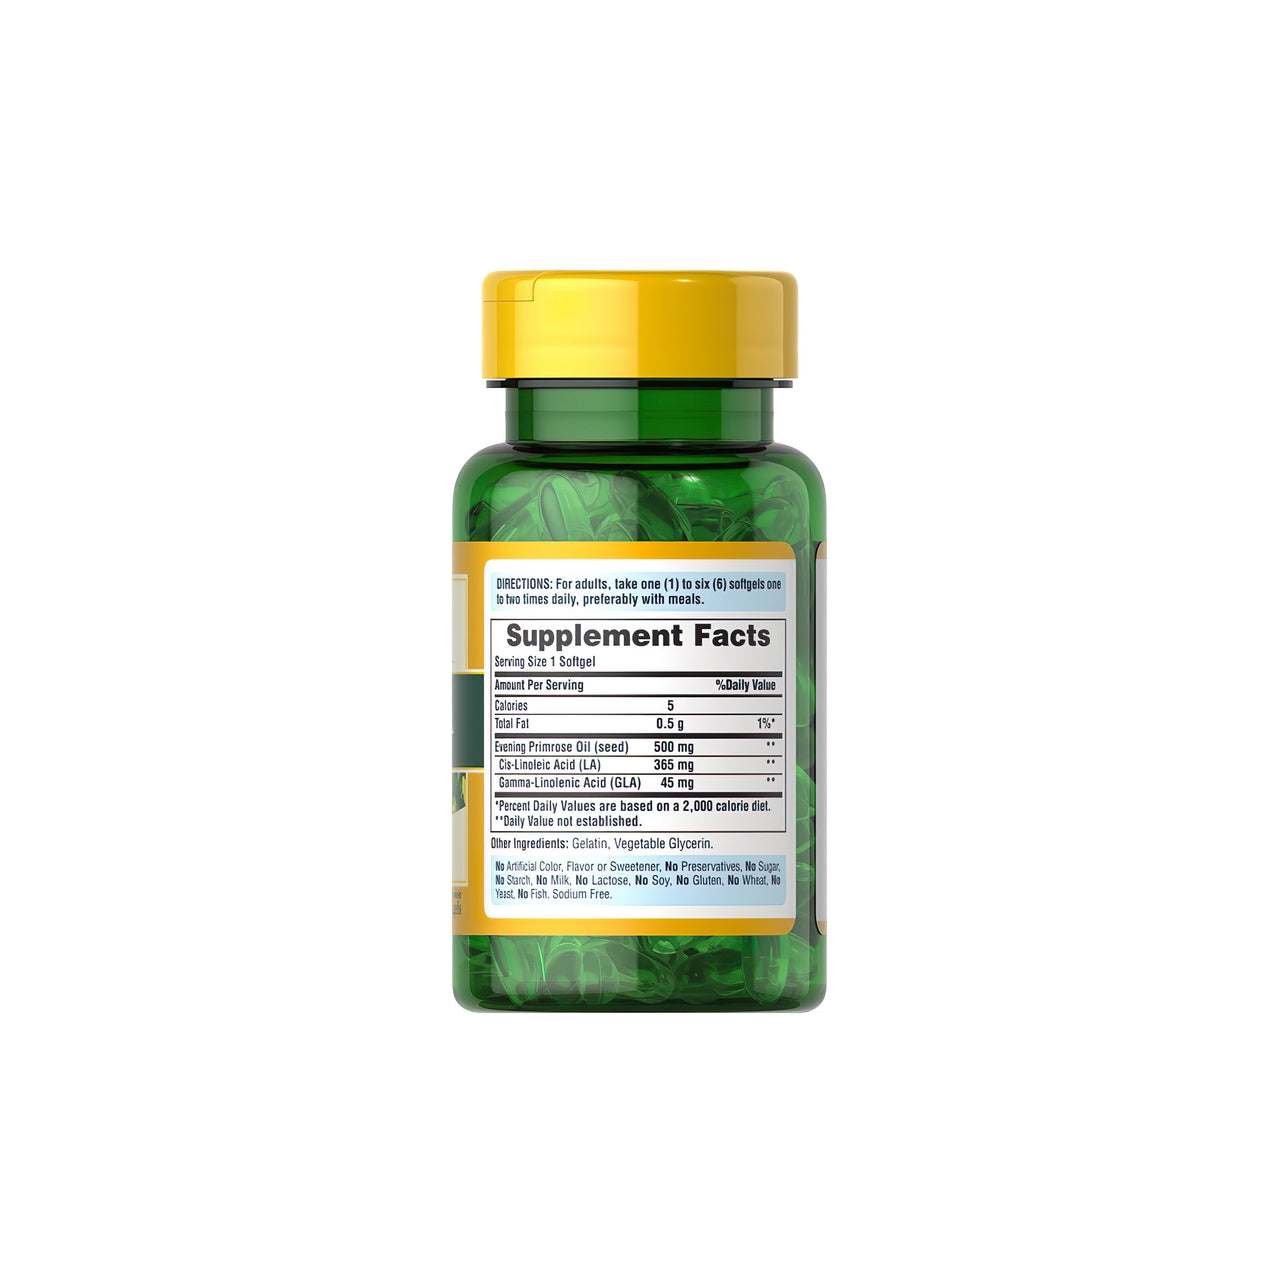 A bottle of Evening Primrose Oil 500 mg with GLA 100 Rapid Release Softgels by Puritan's Pride on a white background.